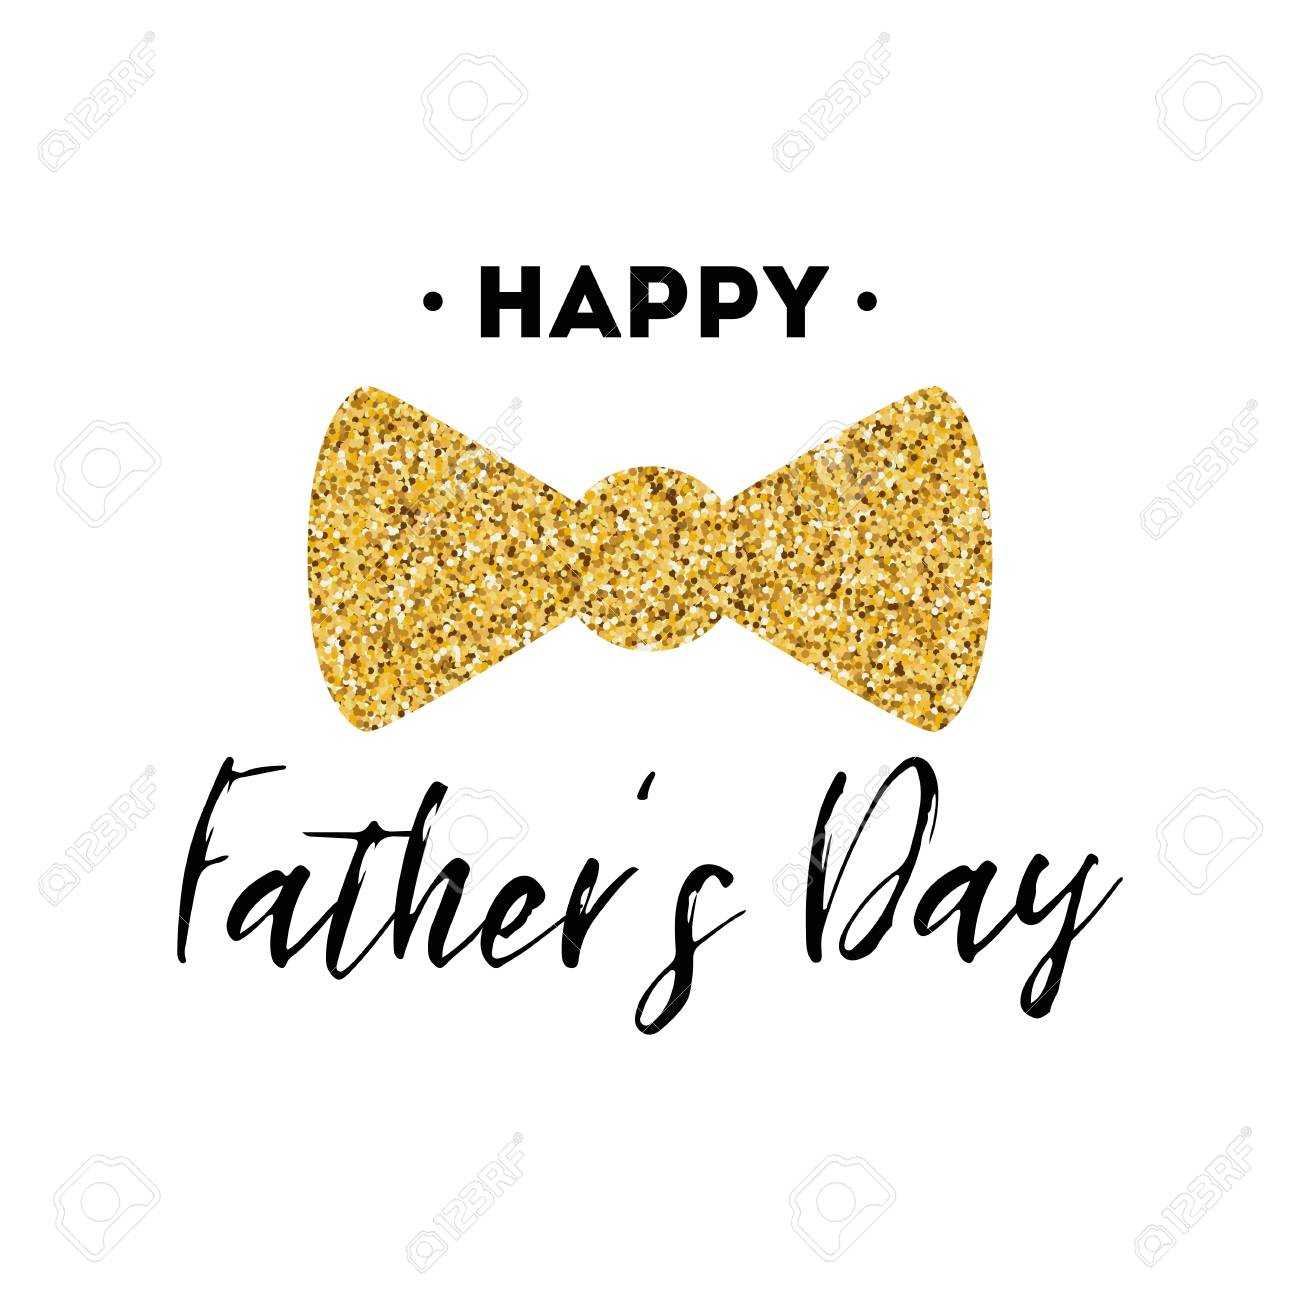 Fathers Day Card Design With Lettering, Golden Bow Tie Butterfly Throughout Fathers Day Card Template